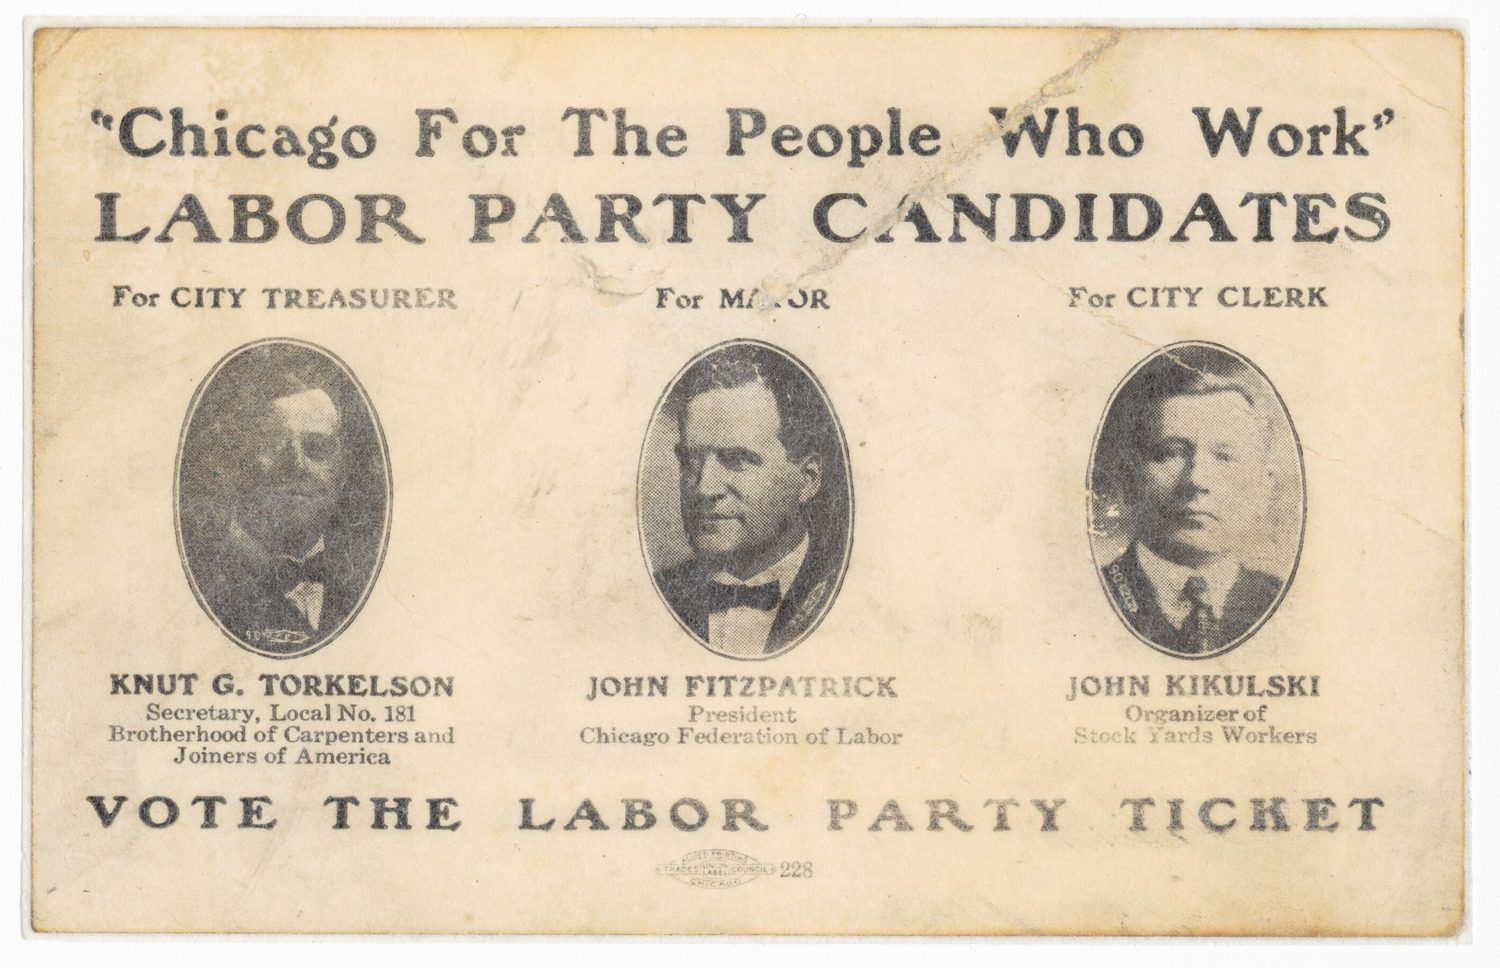 Labor Party ticket palm card, front